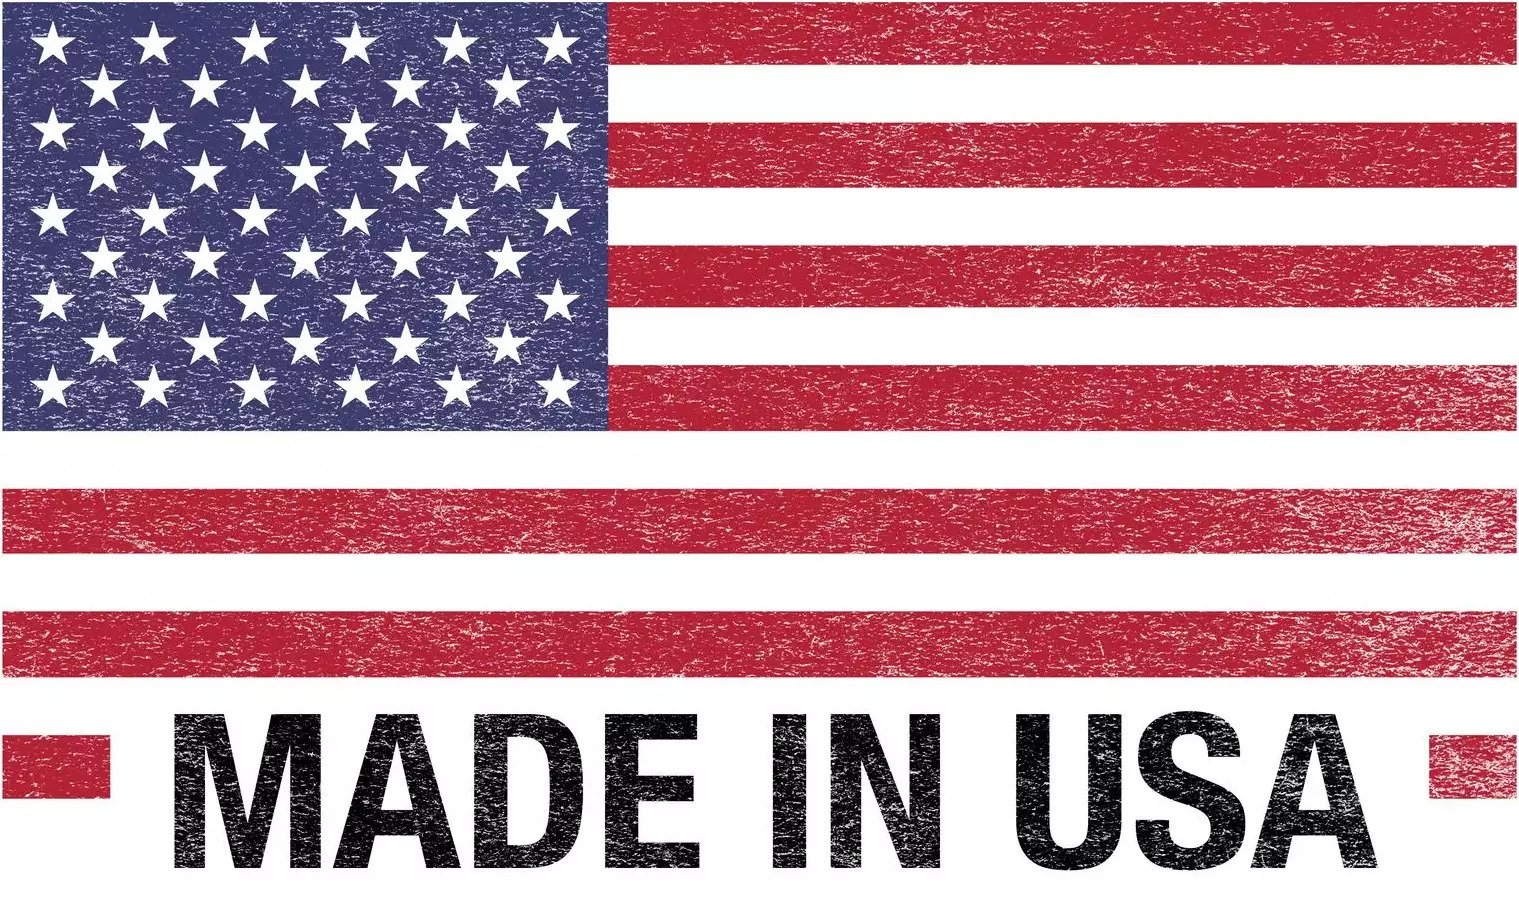 Made in USA banner